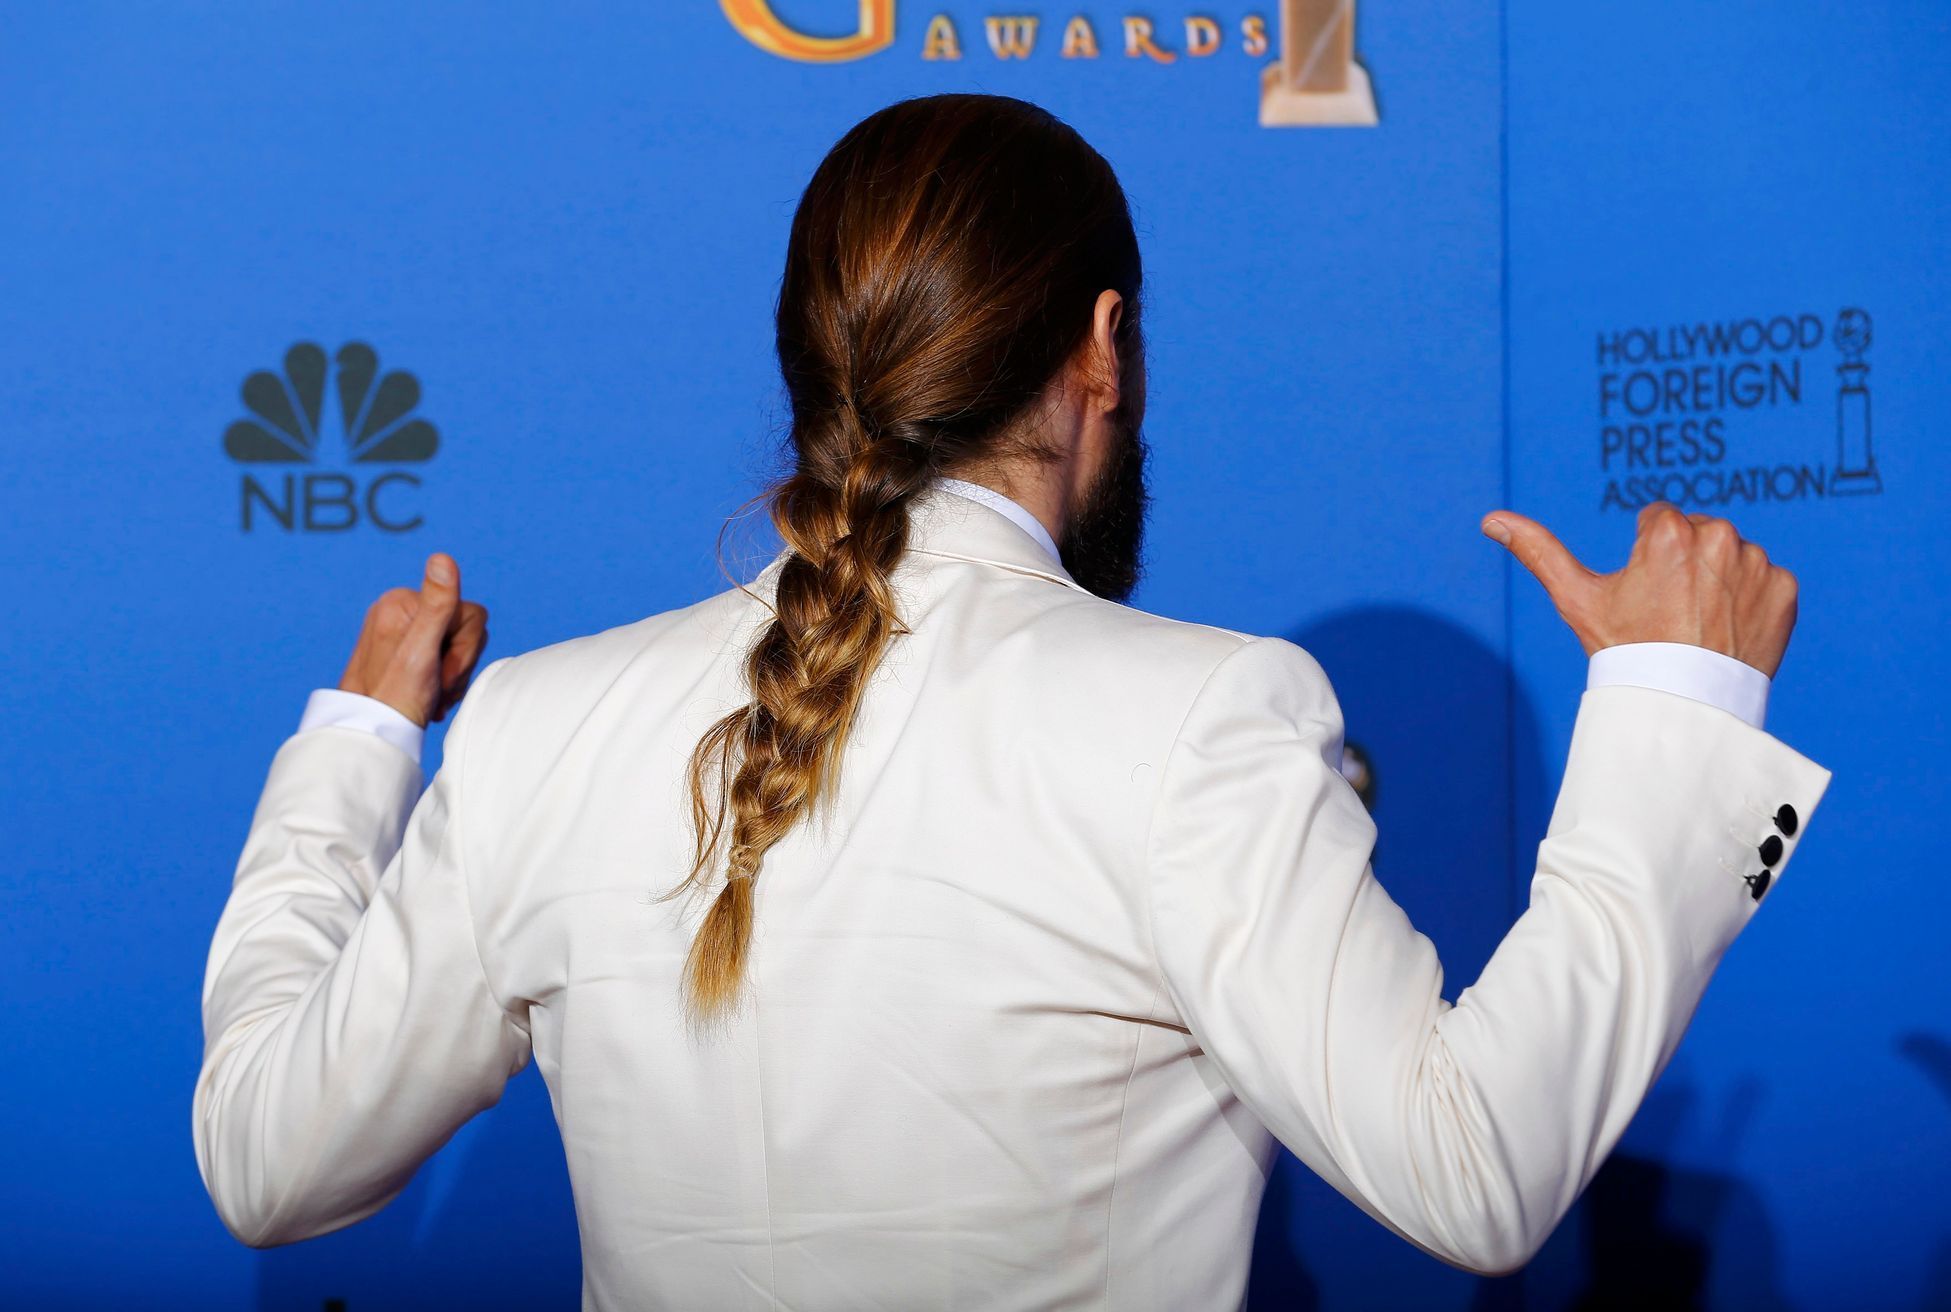 Jared Leto poses backstage during the 72nd Golden Globe Awards in Beverly Hills